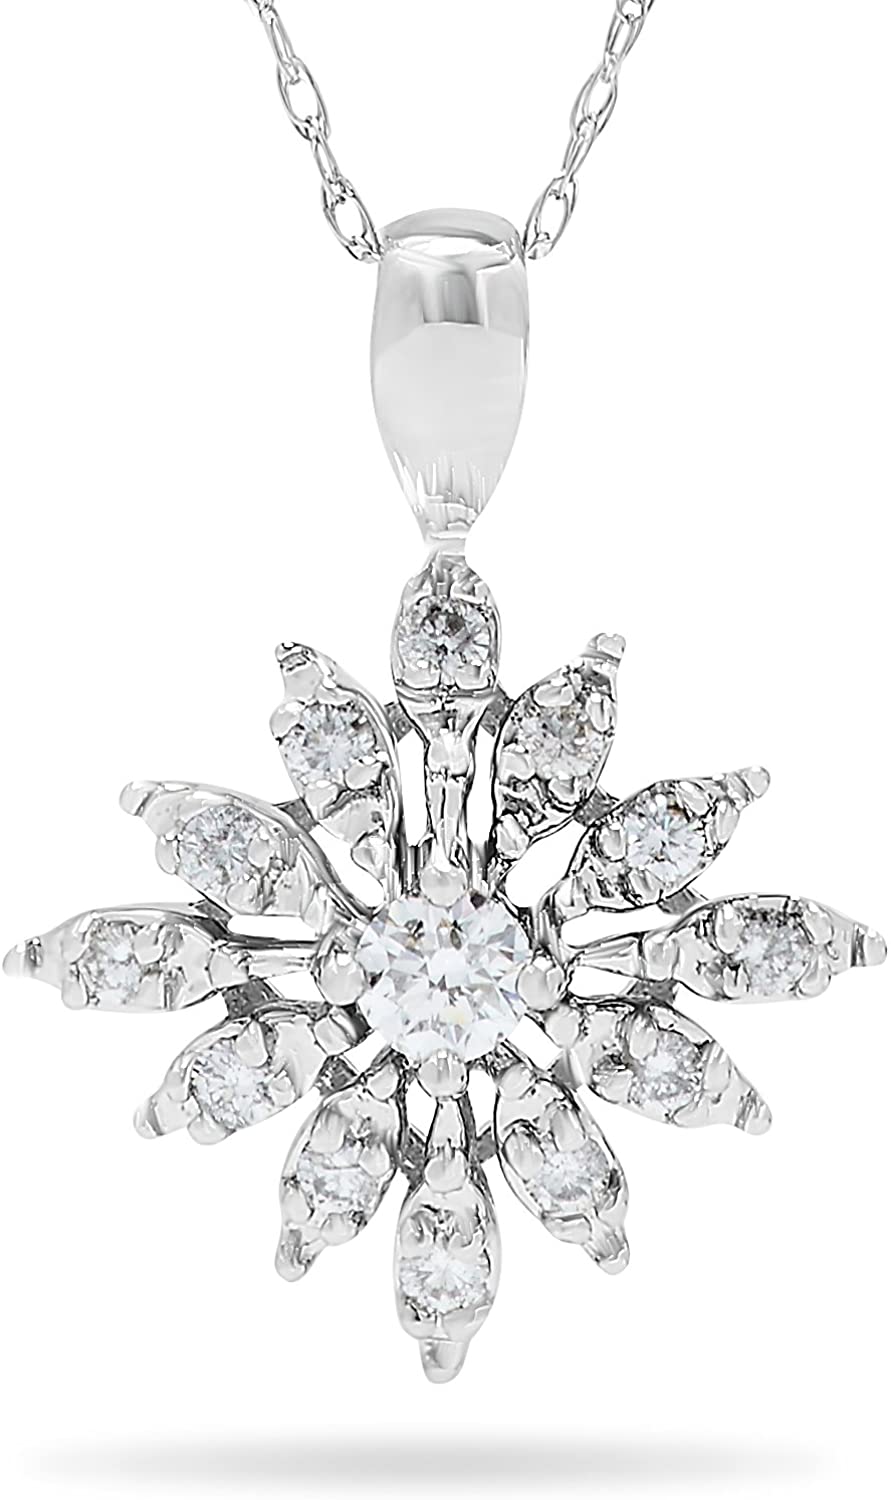 Jewelry Bliss 14k White Gold Diamond Snow Flake Pendant Necklace For Women 18 Inch Chain, 45cts